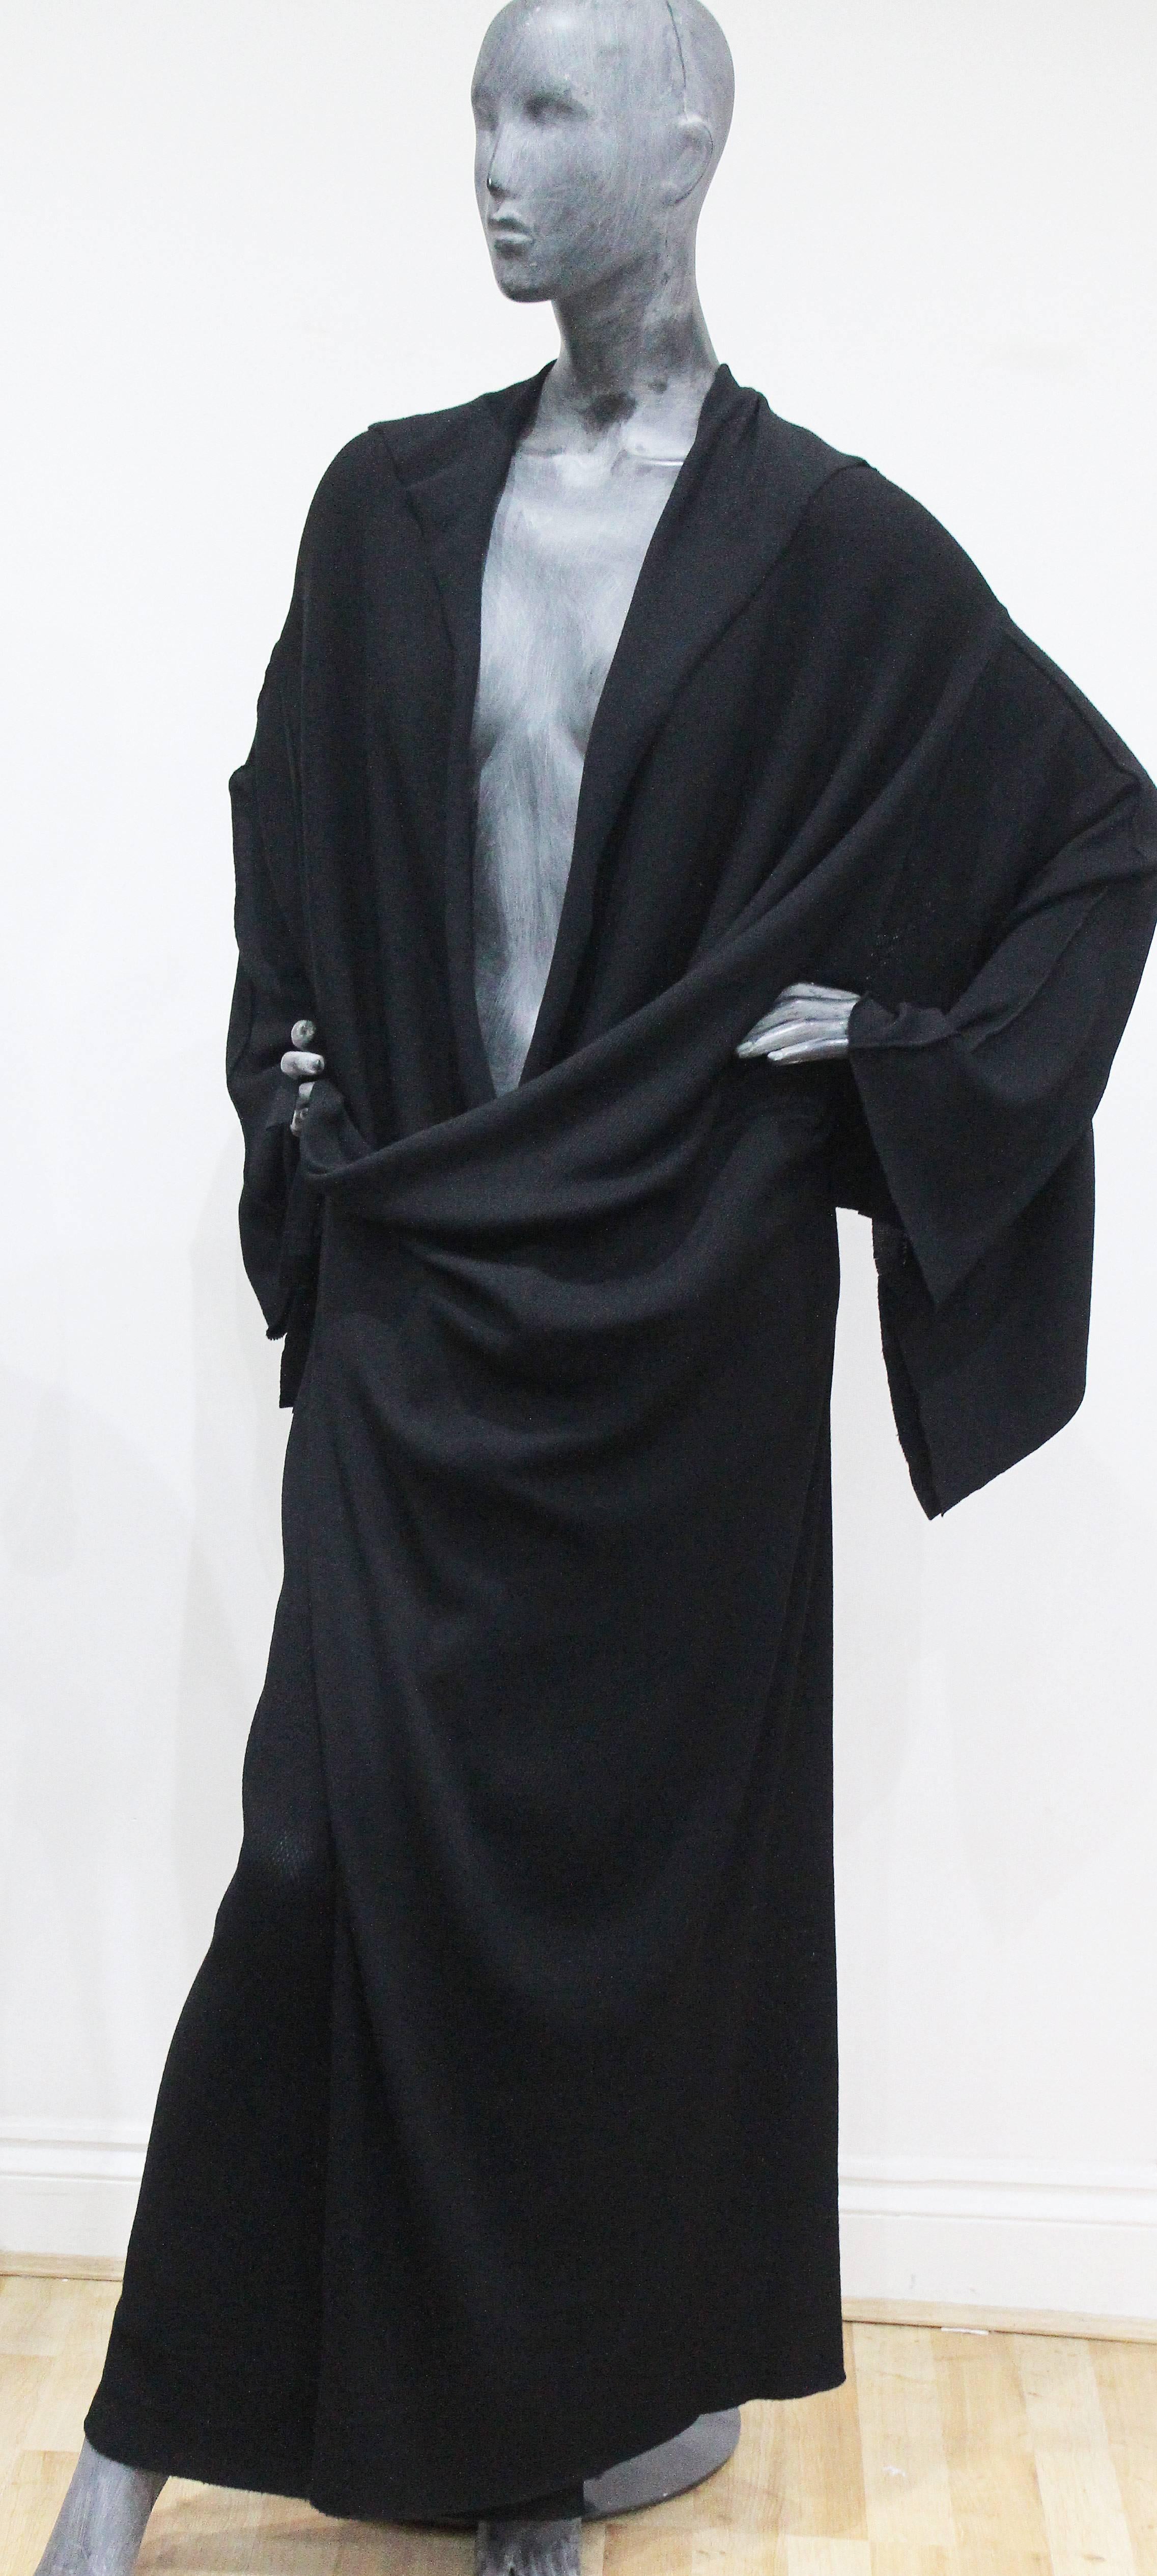 An exceptional Issey Miyake black knitted full length cardigan in a kimono style. The cardigan fastens under both armpits which creates beautiful drapery and a kimono style. The sleeves are very wide and have long raw cut edges as does the collar.